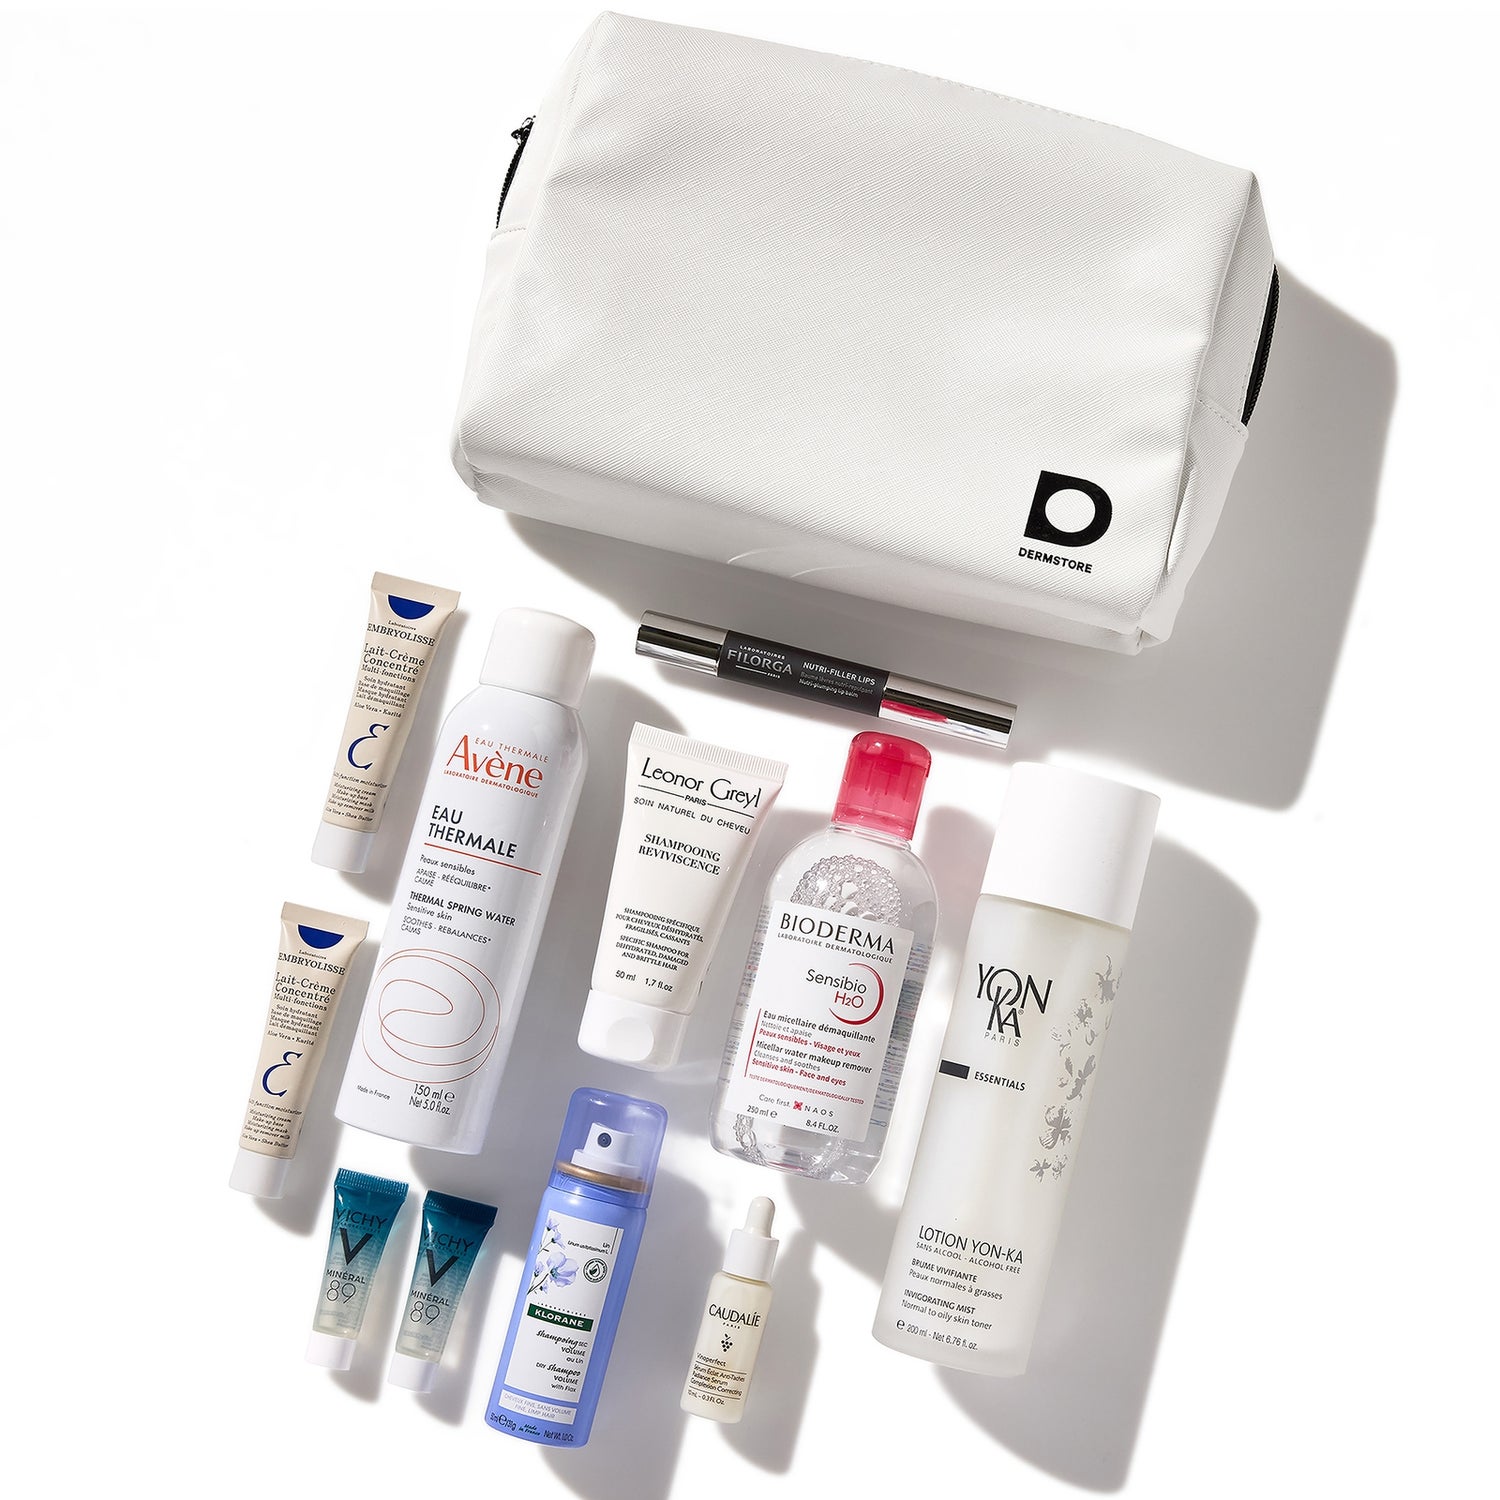 Best of Dermstore: The French Pharmacy Edit - $248 Value